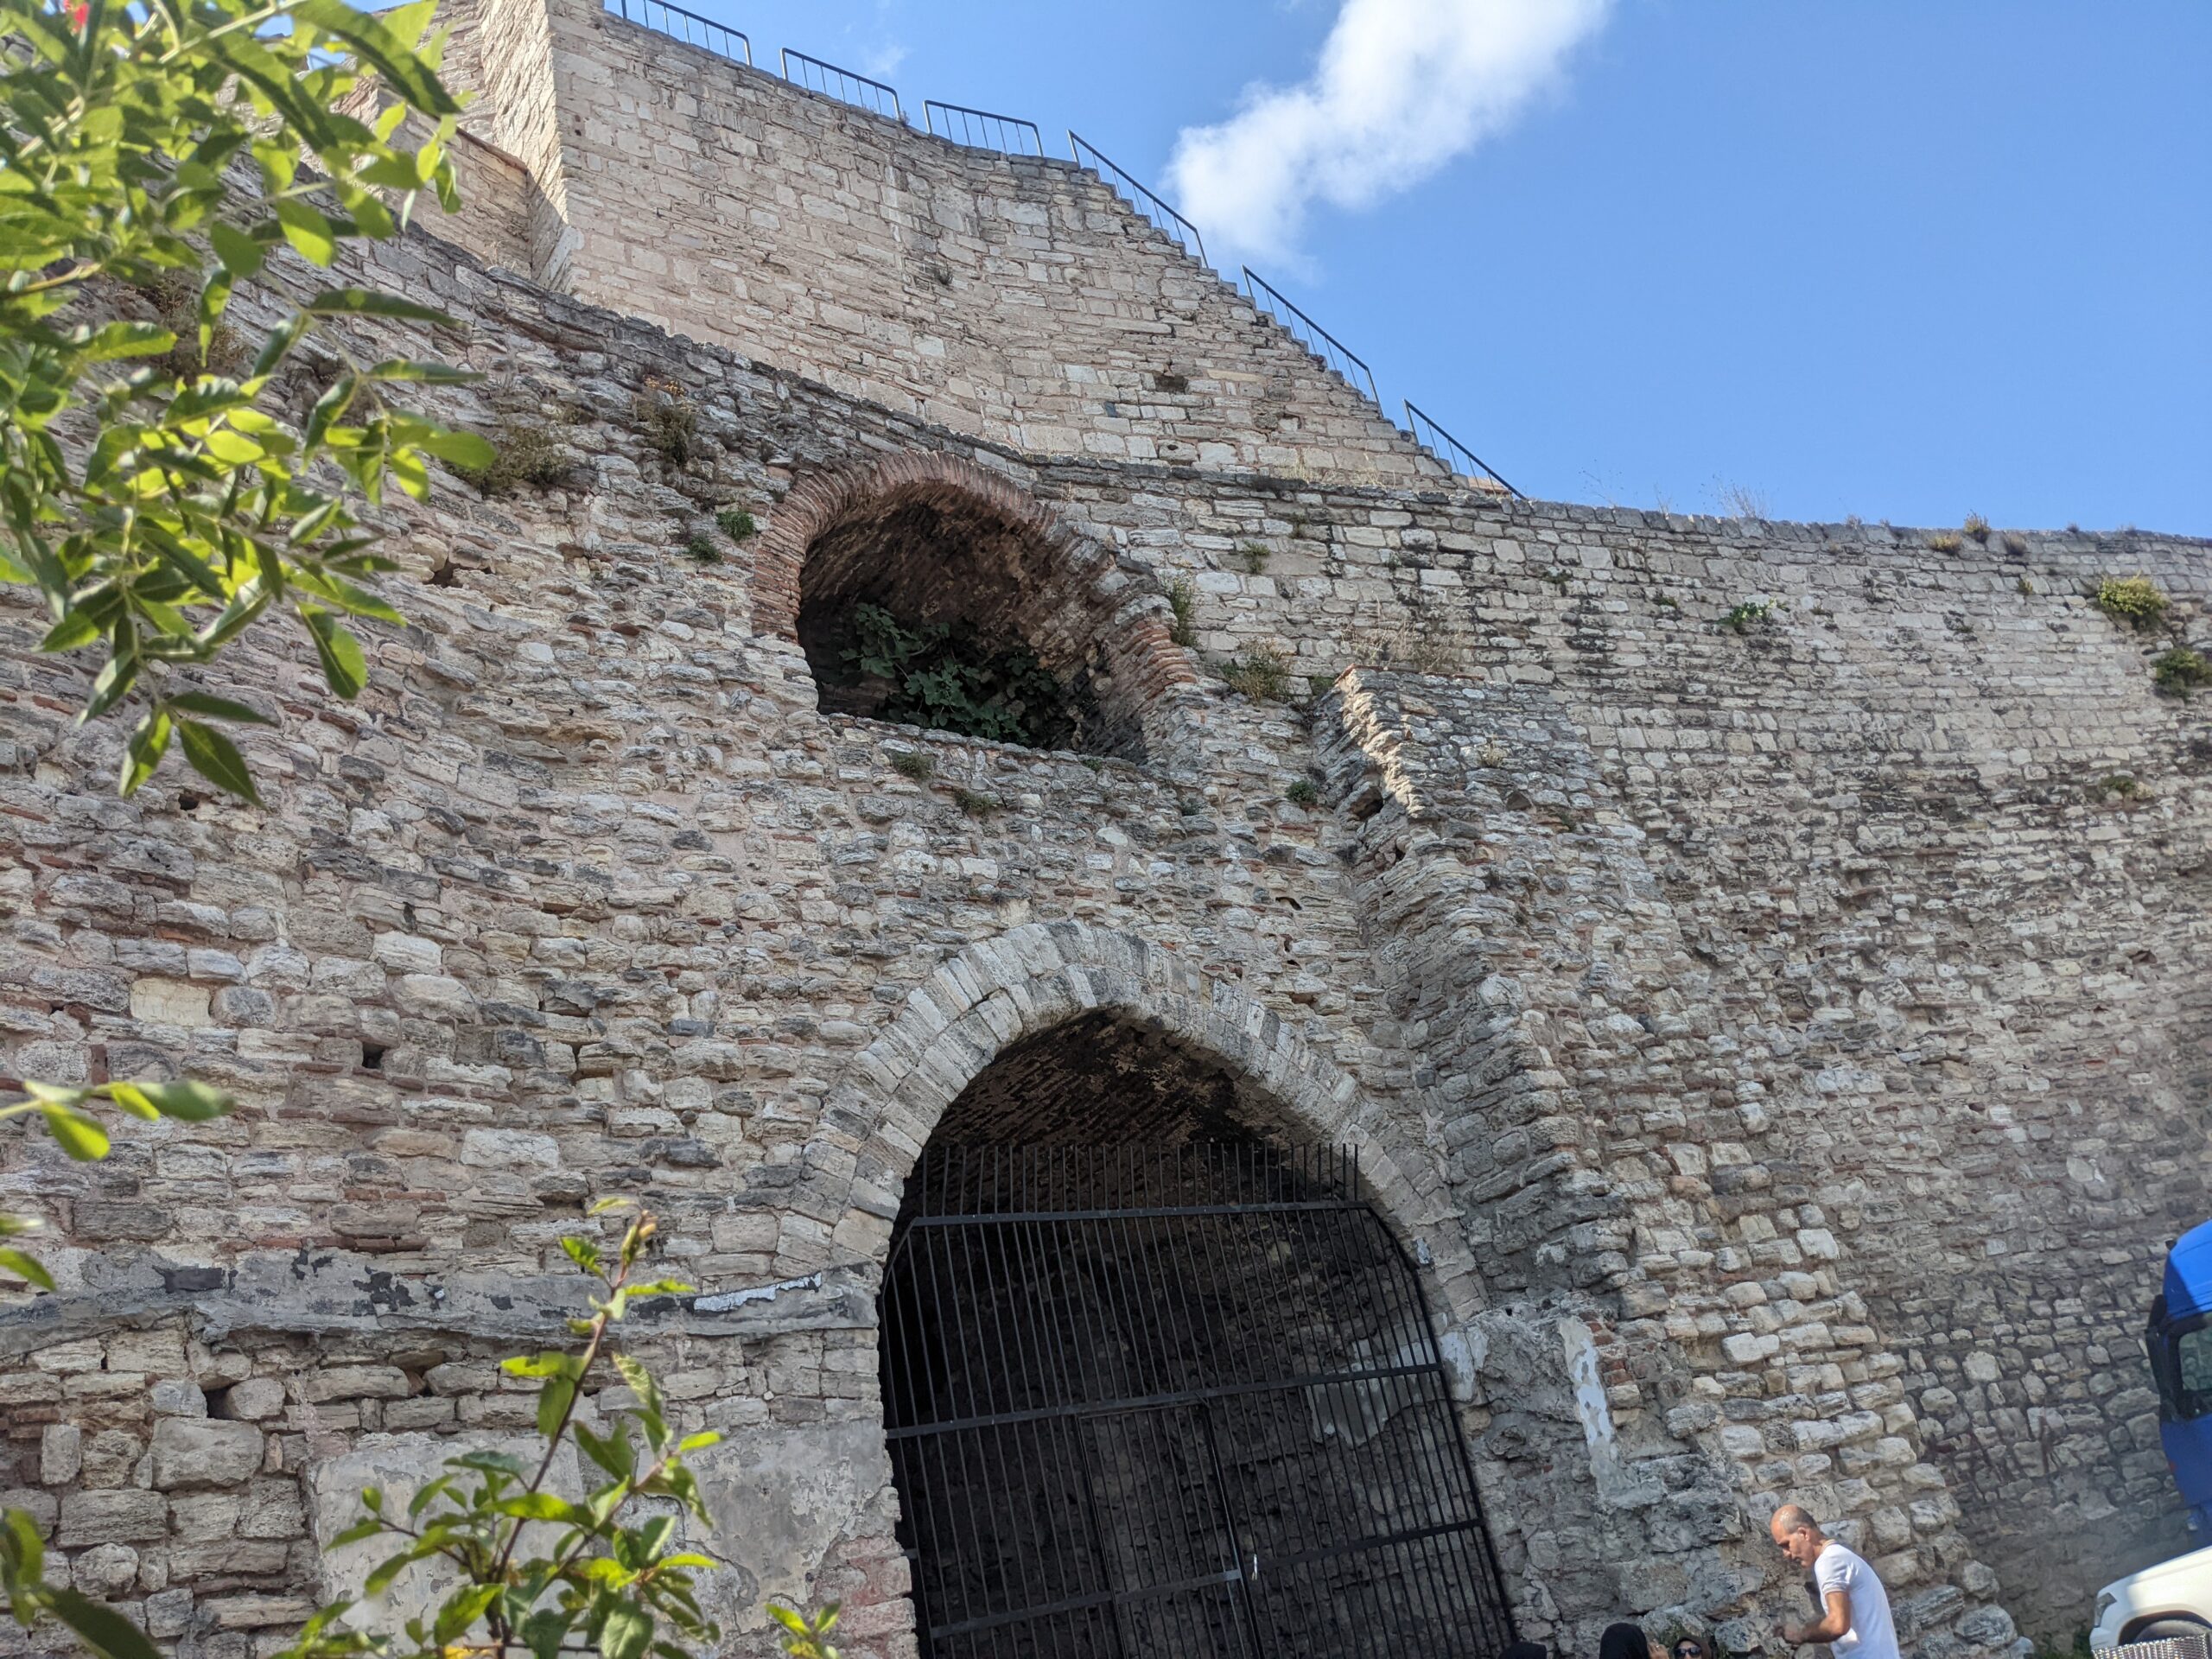 Istanbul Day Three- the Walls of Constantinople and More